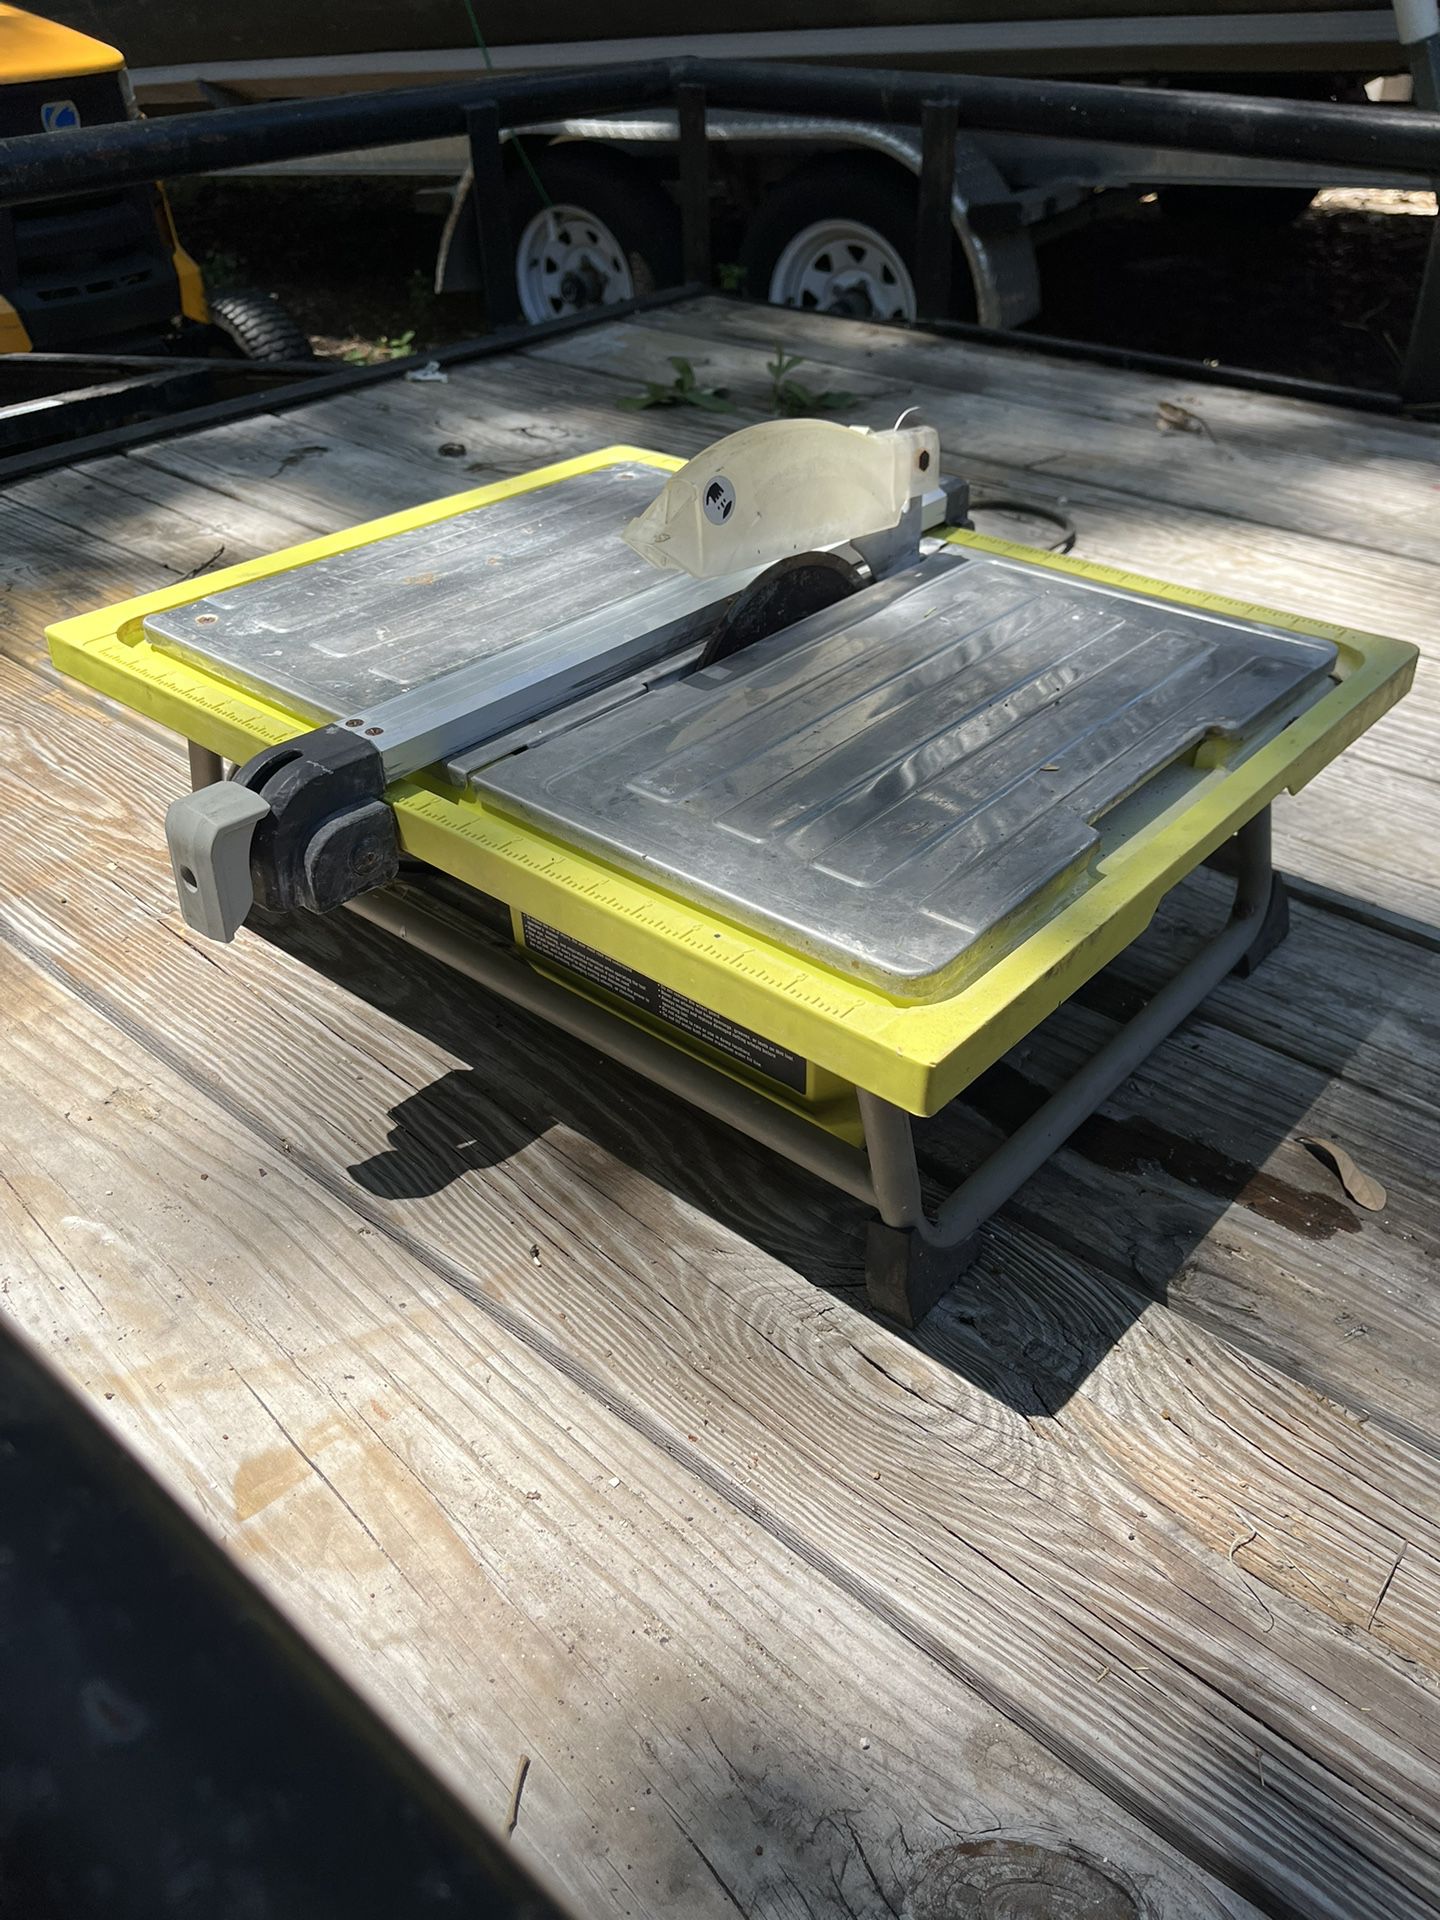 Ryobi WS722 Portable Tile and Stone Saw  Get the precision cuts you need for your next DIY project with the Ryobi WS722 Tile and Stone Saw. While this